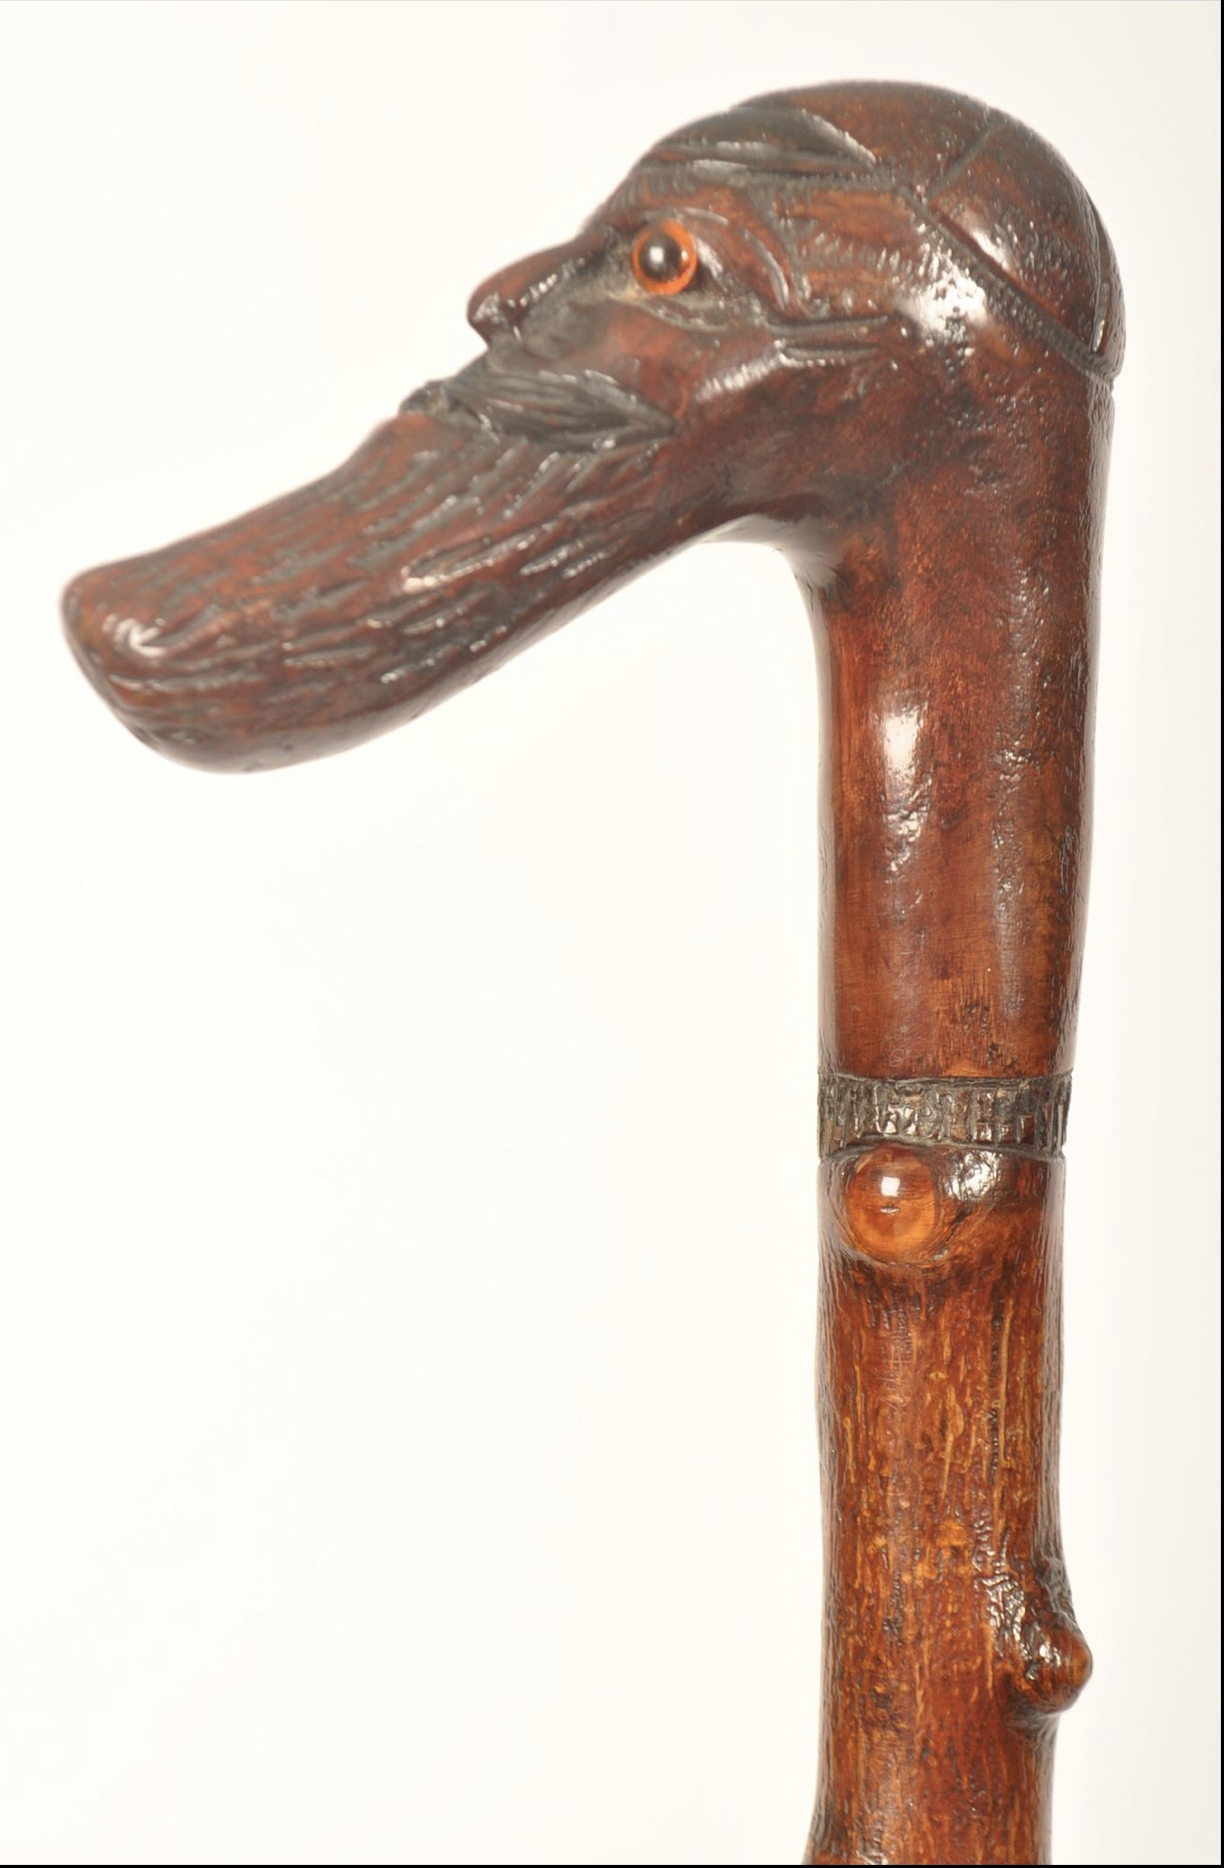 Cricketing interest walking stick with the head of WG grace - Image 4 of 5